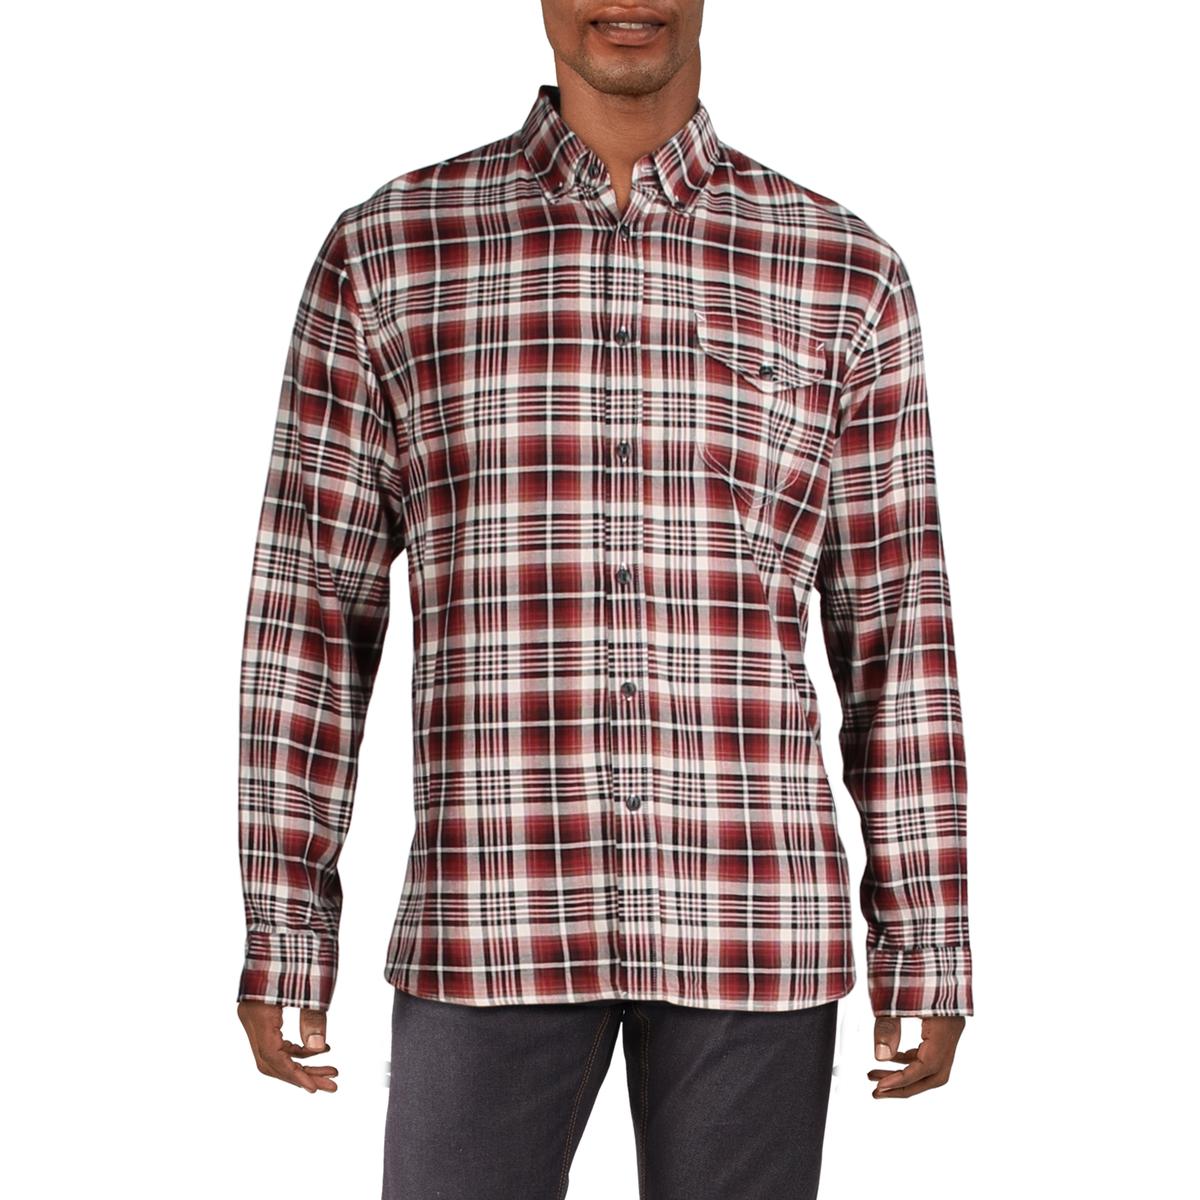 Jachs NY Mens Red Cotton Plaid Fitted Button-Down Shirt S BHFO 8709 | eBay